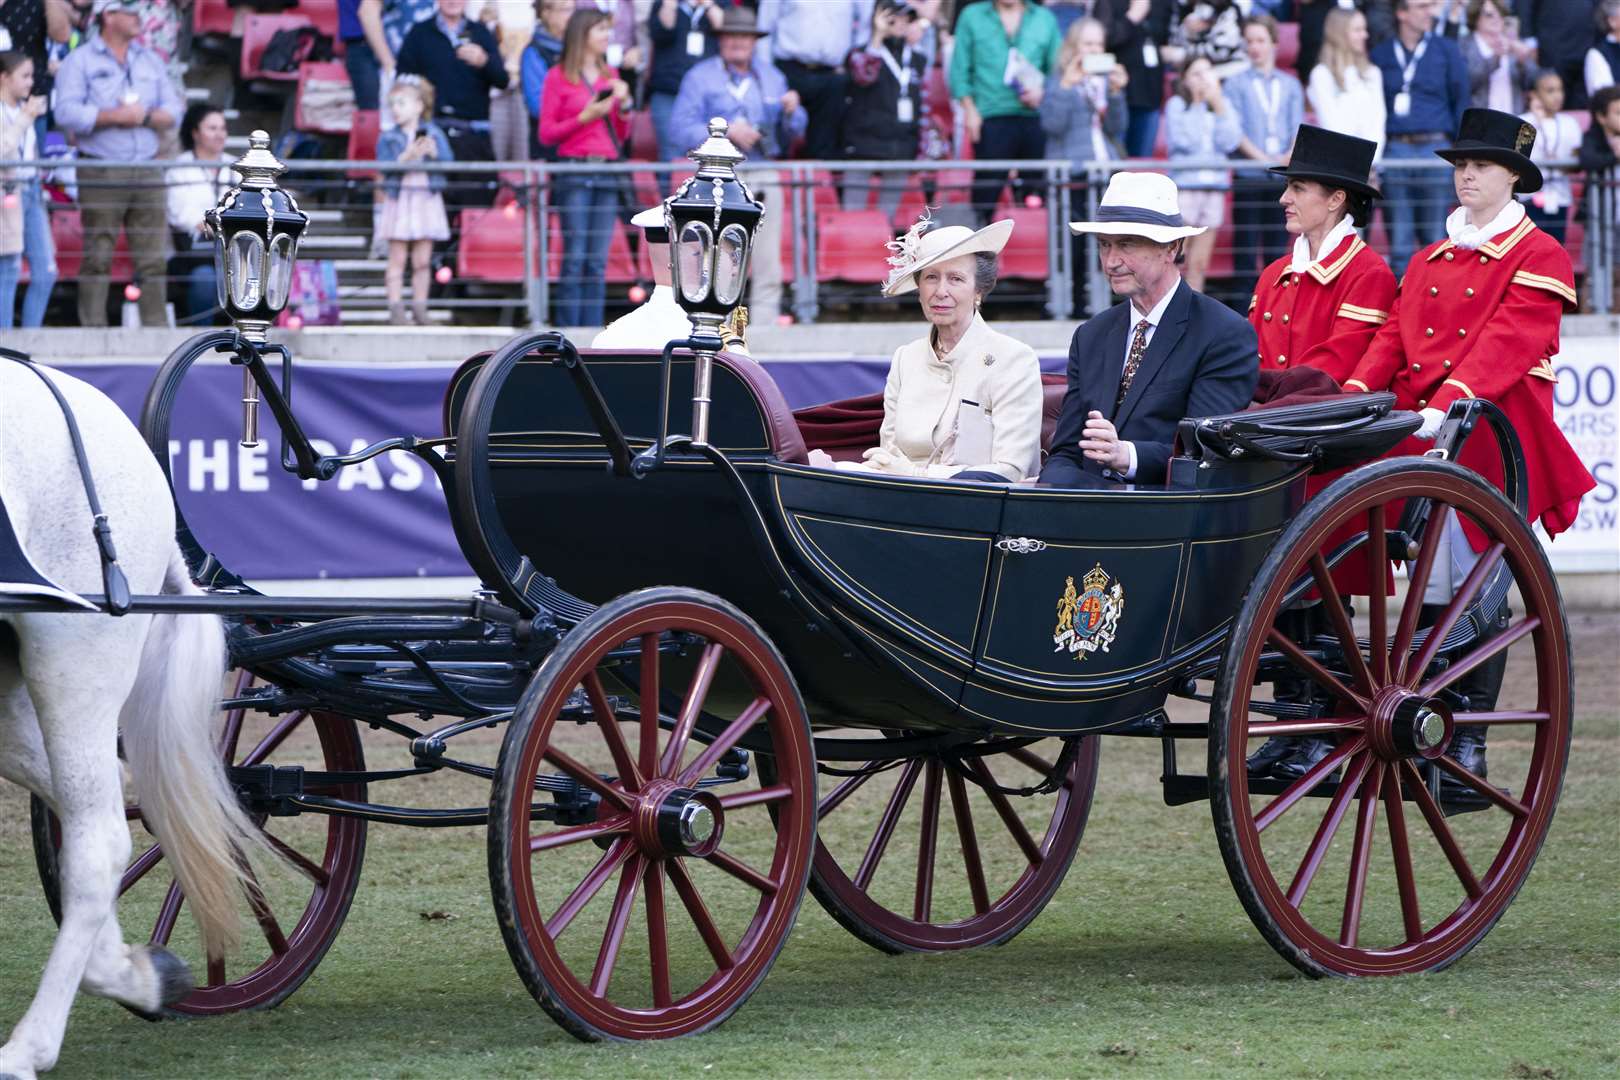 The Princess Royal and Vice Admiral Sir Tim Laurence ride in a horse-drawn caleche, which carried the Queen, the Duke of Edinburgh, the Prince of Wales and the Princess Royal in 1970, during the opening ceremony (Kirsty O’Connor/PA)